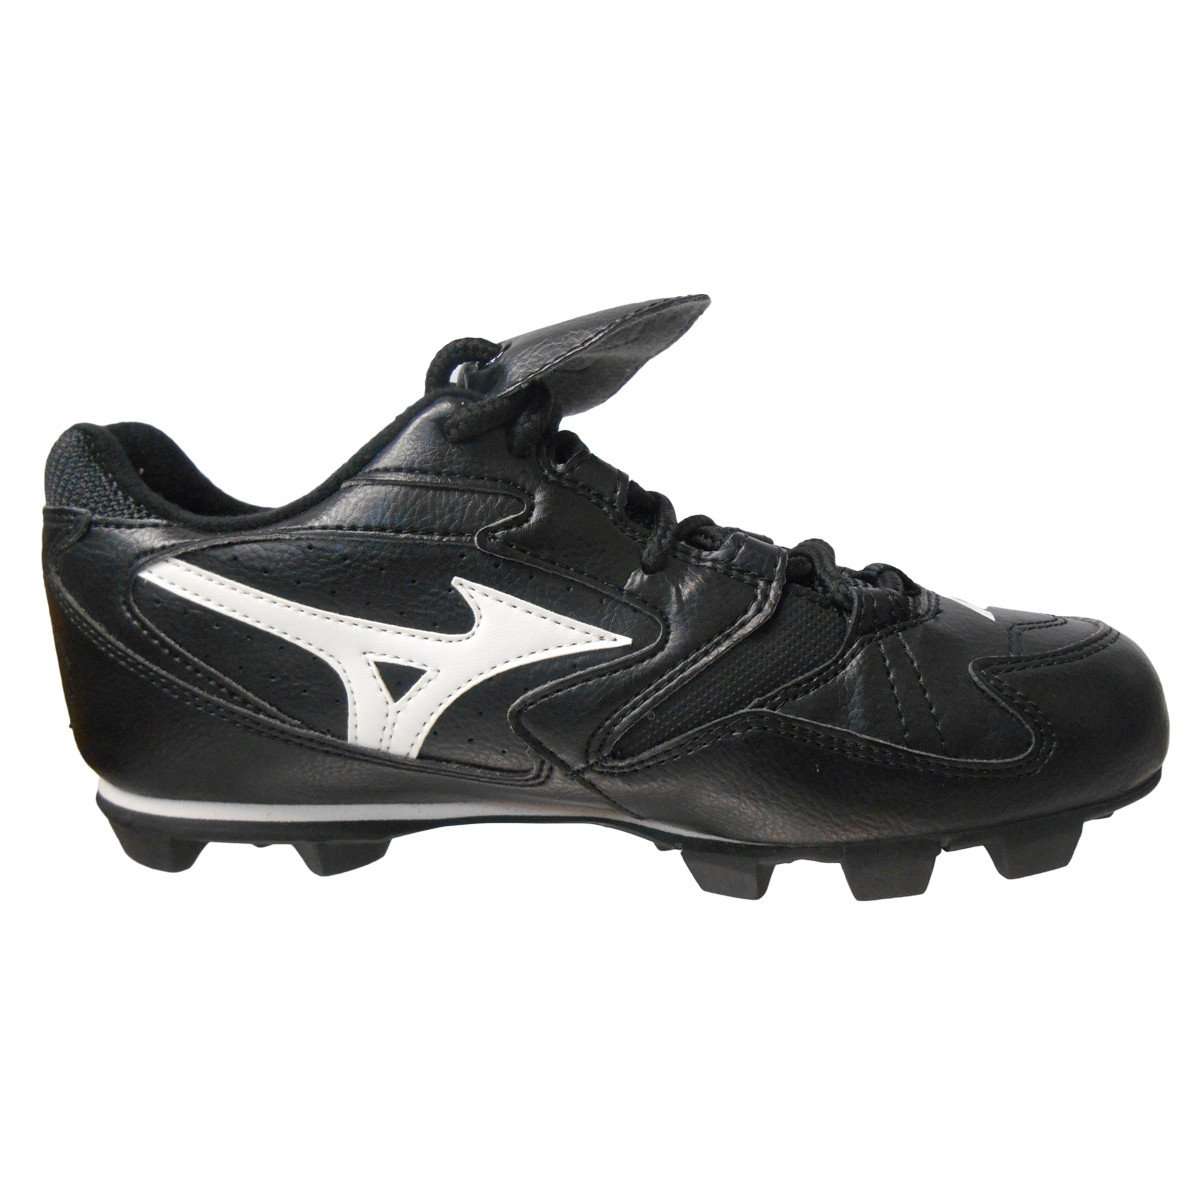 mizuno youth soccer cleats